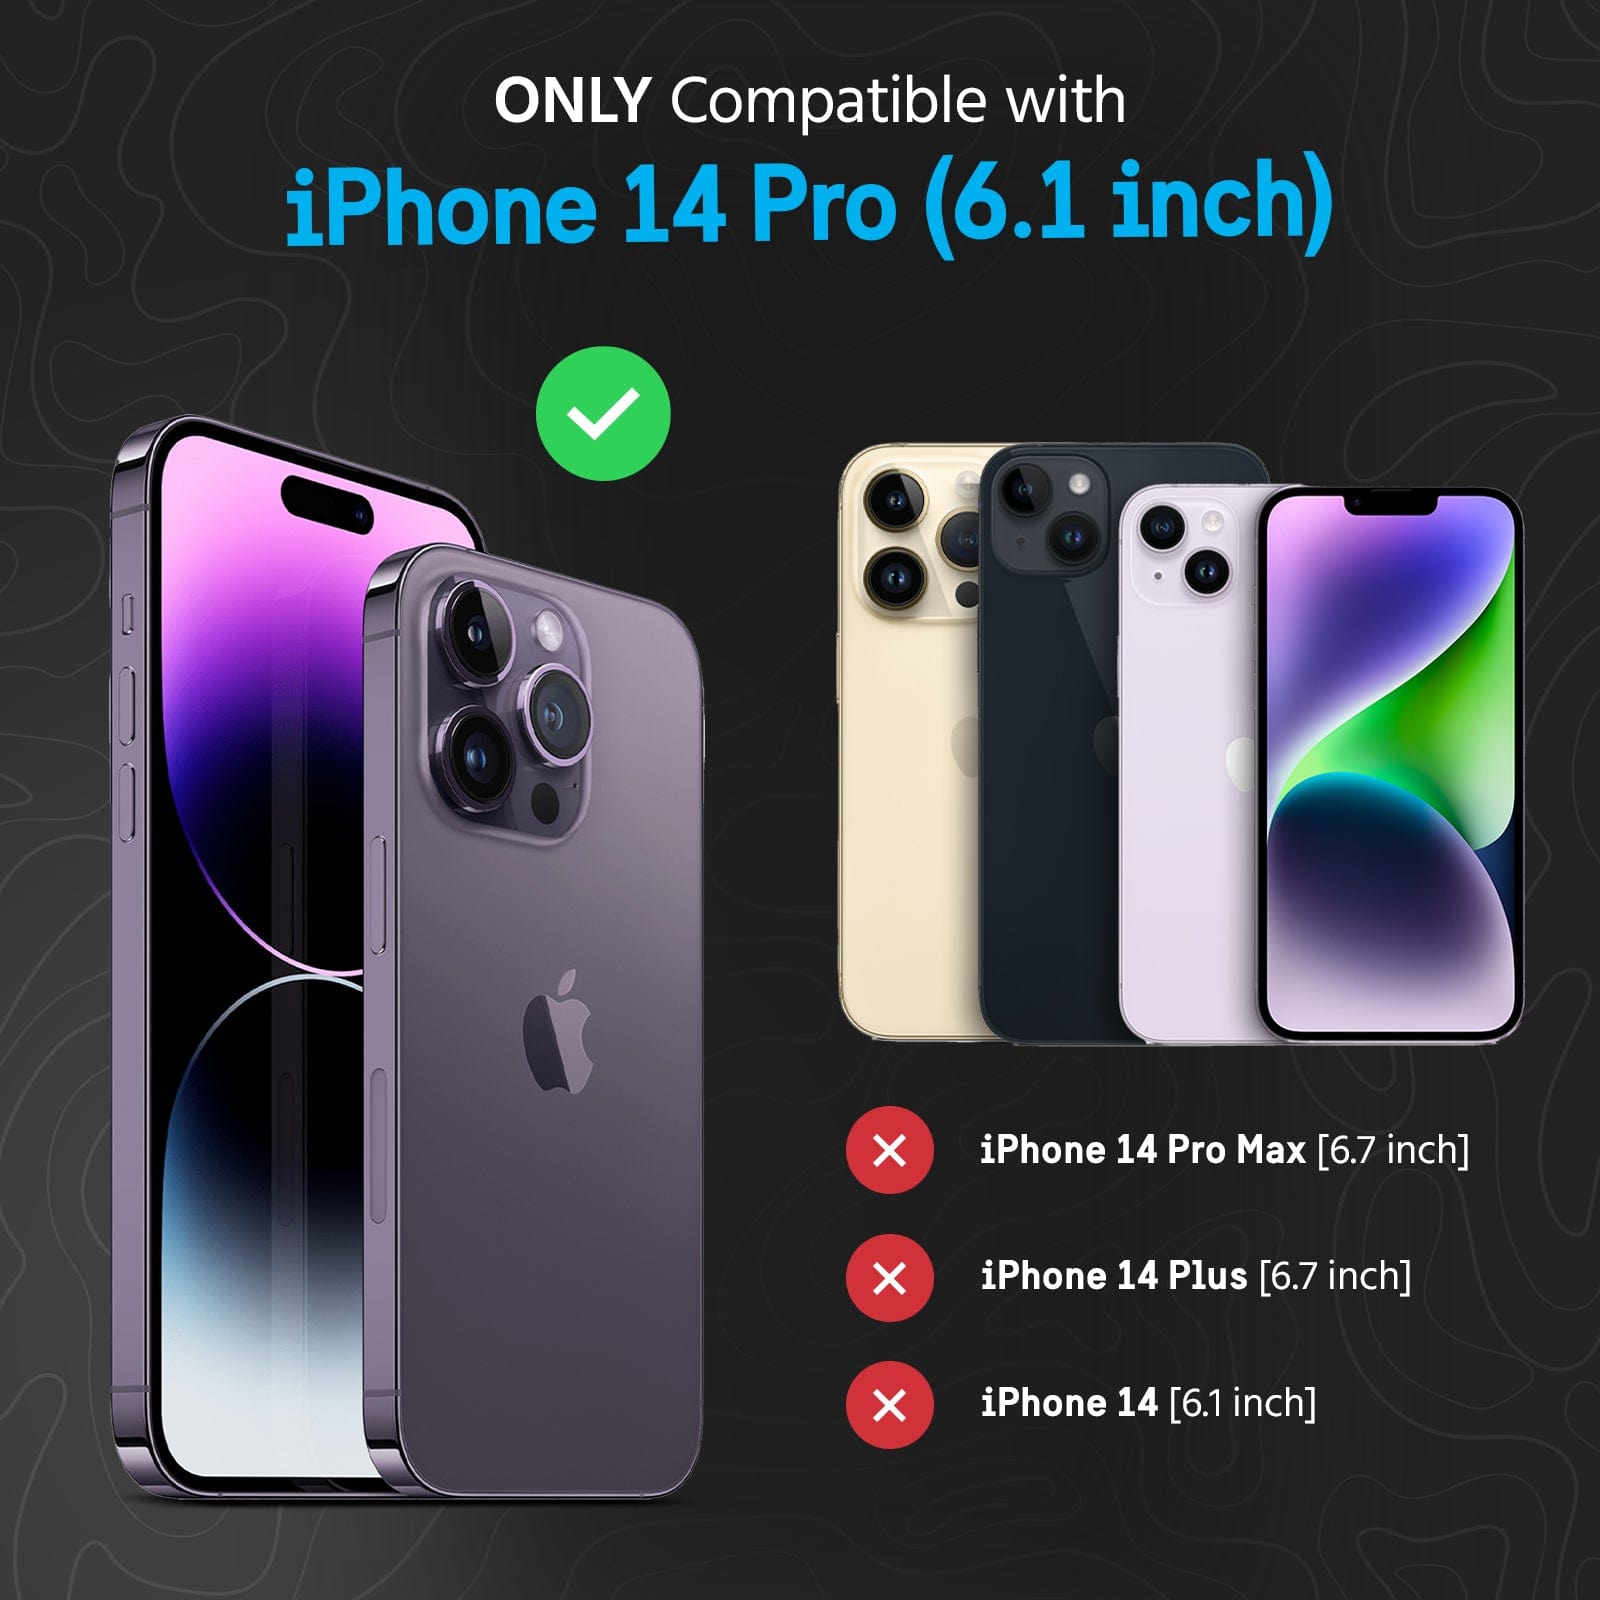 ONLY COMPATIBLE WITH IPHONE 14 PRO (6.1 INCH)